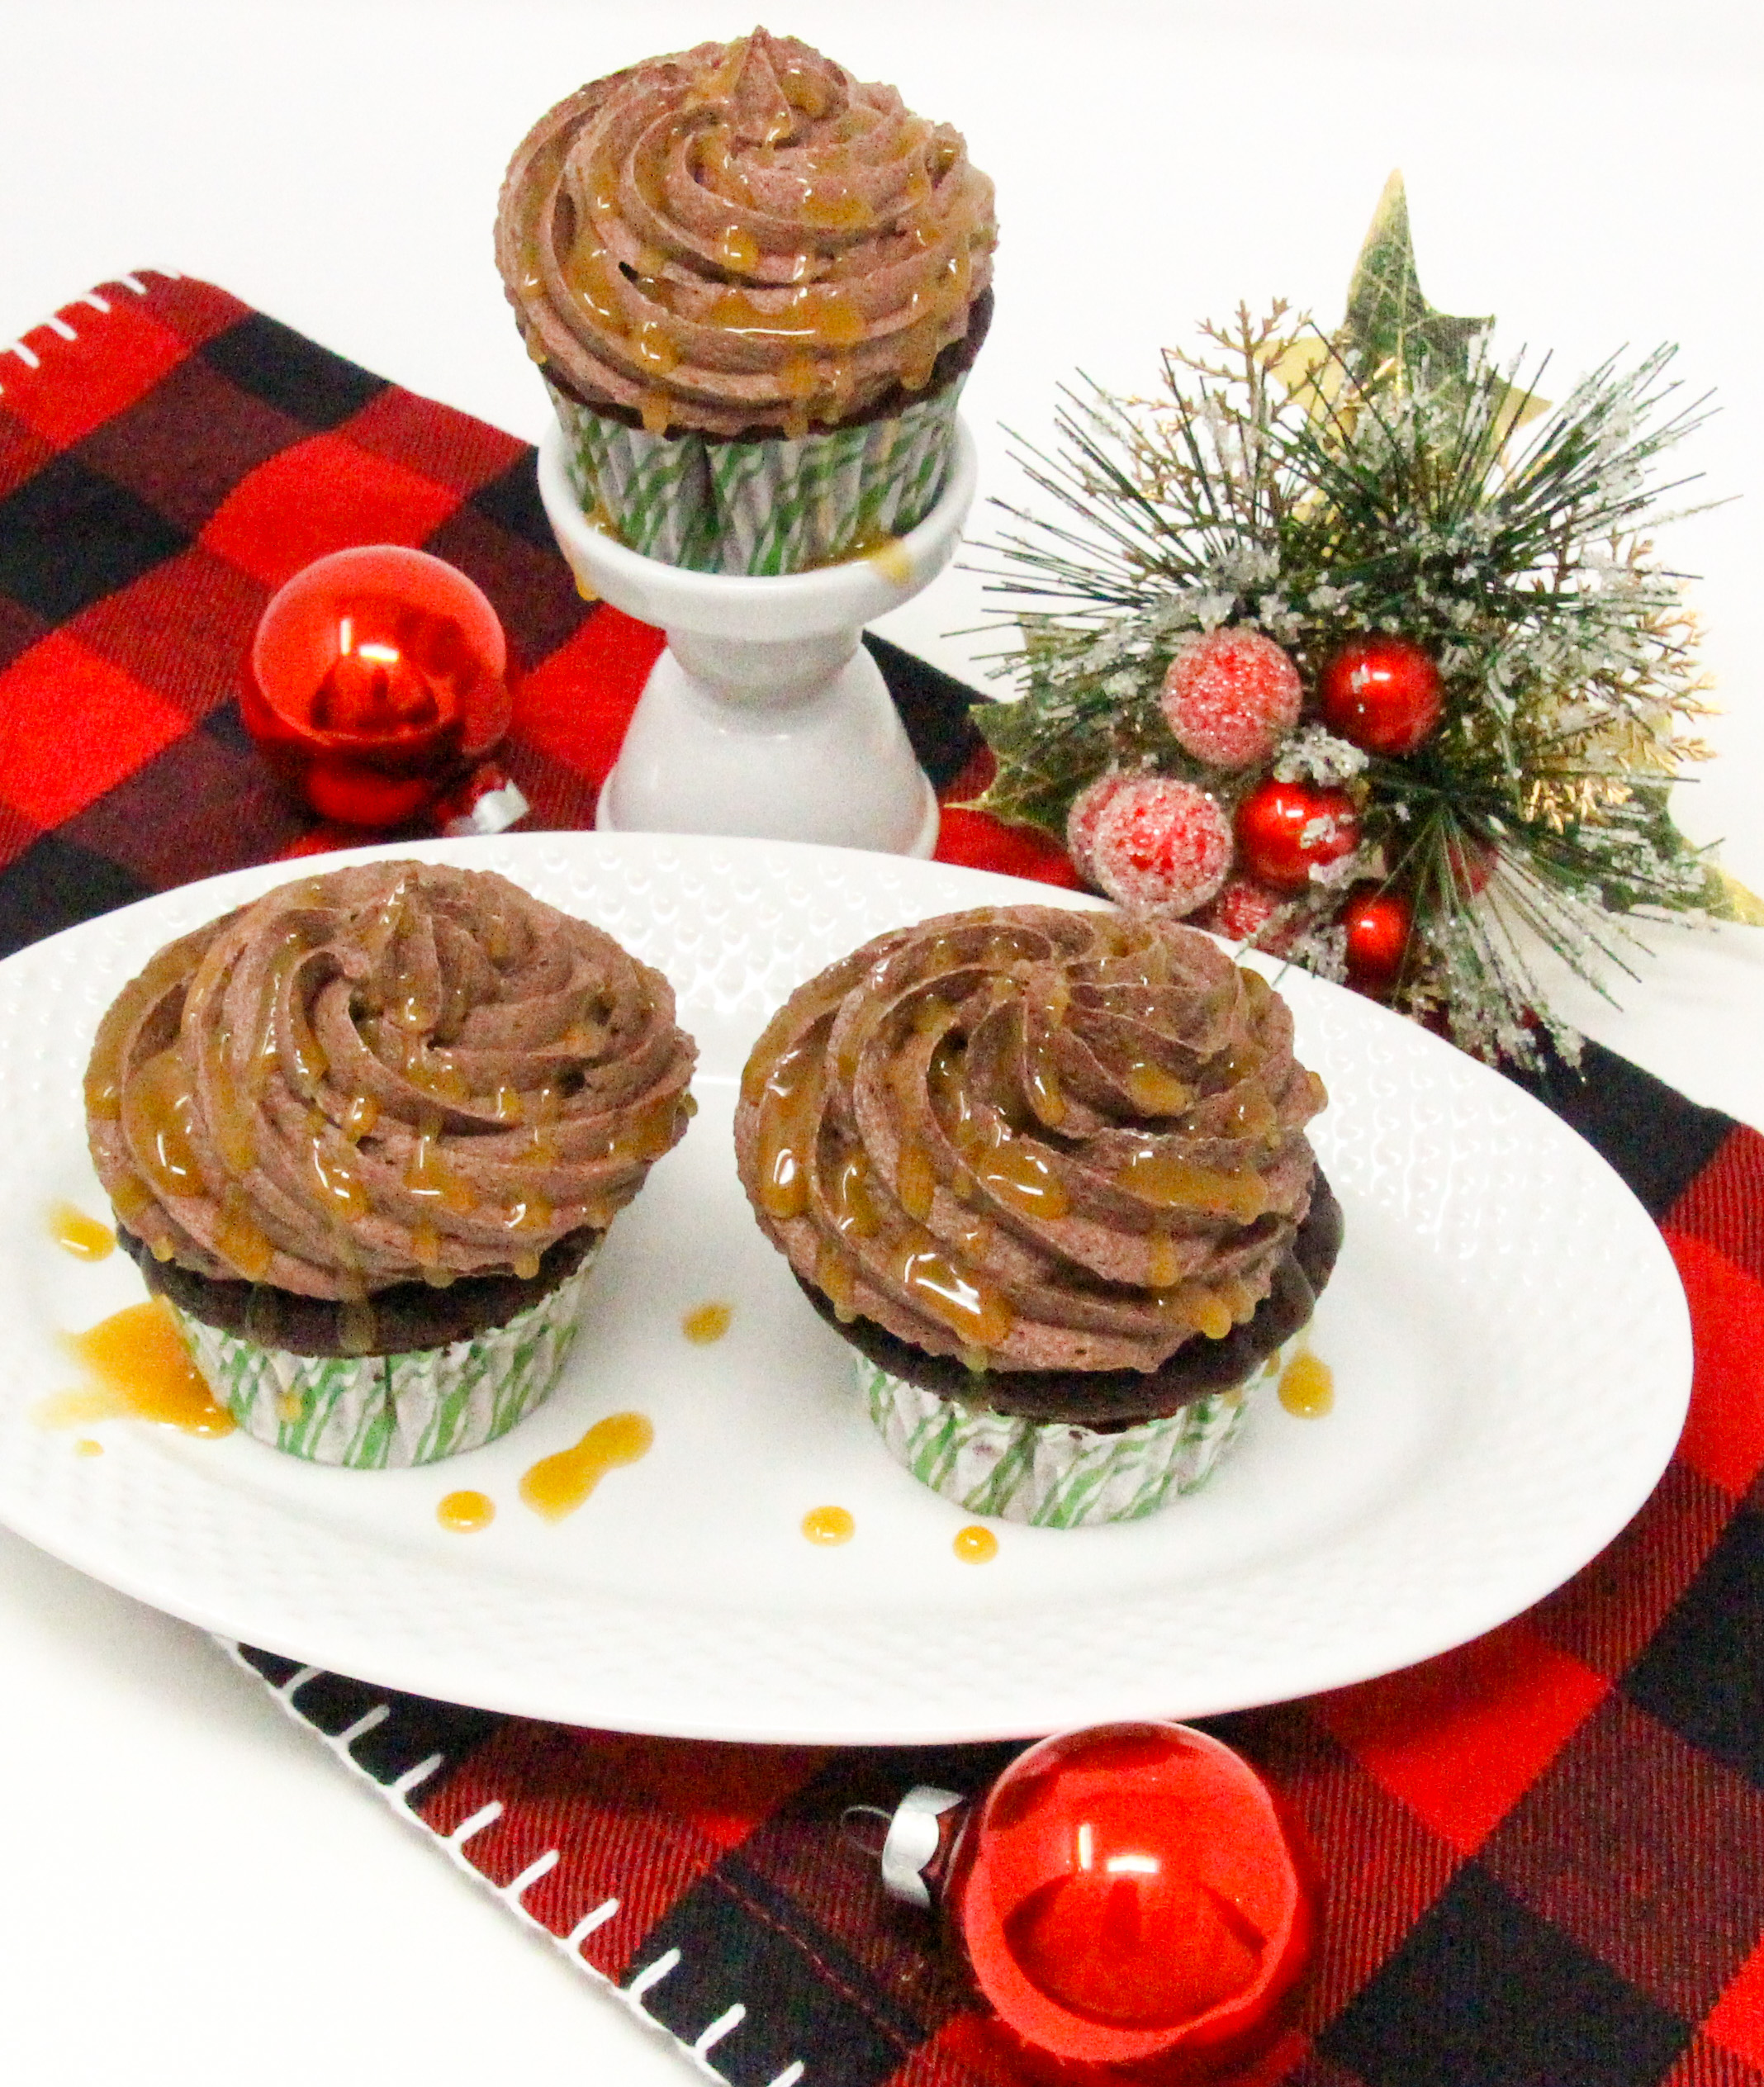 Christmas Caramel Cupcakes are rich, dark chocolate cupcakes, stuffed with homemade caramel, then topped with fudgy buttercream frosting and more caramel! Recipe shared with permission granted by Christina Romeril, author of A CHRISTMAS CANDY KILLING.